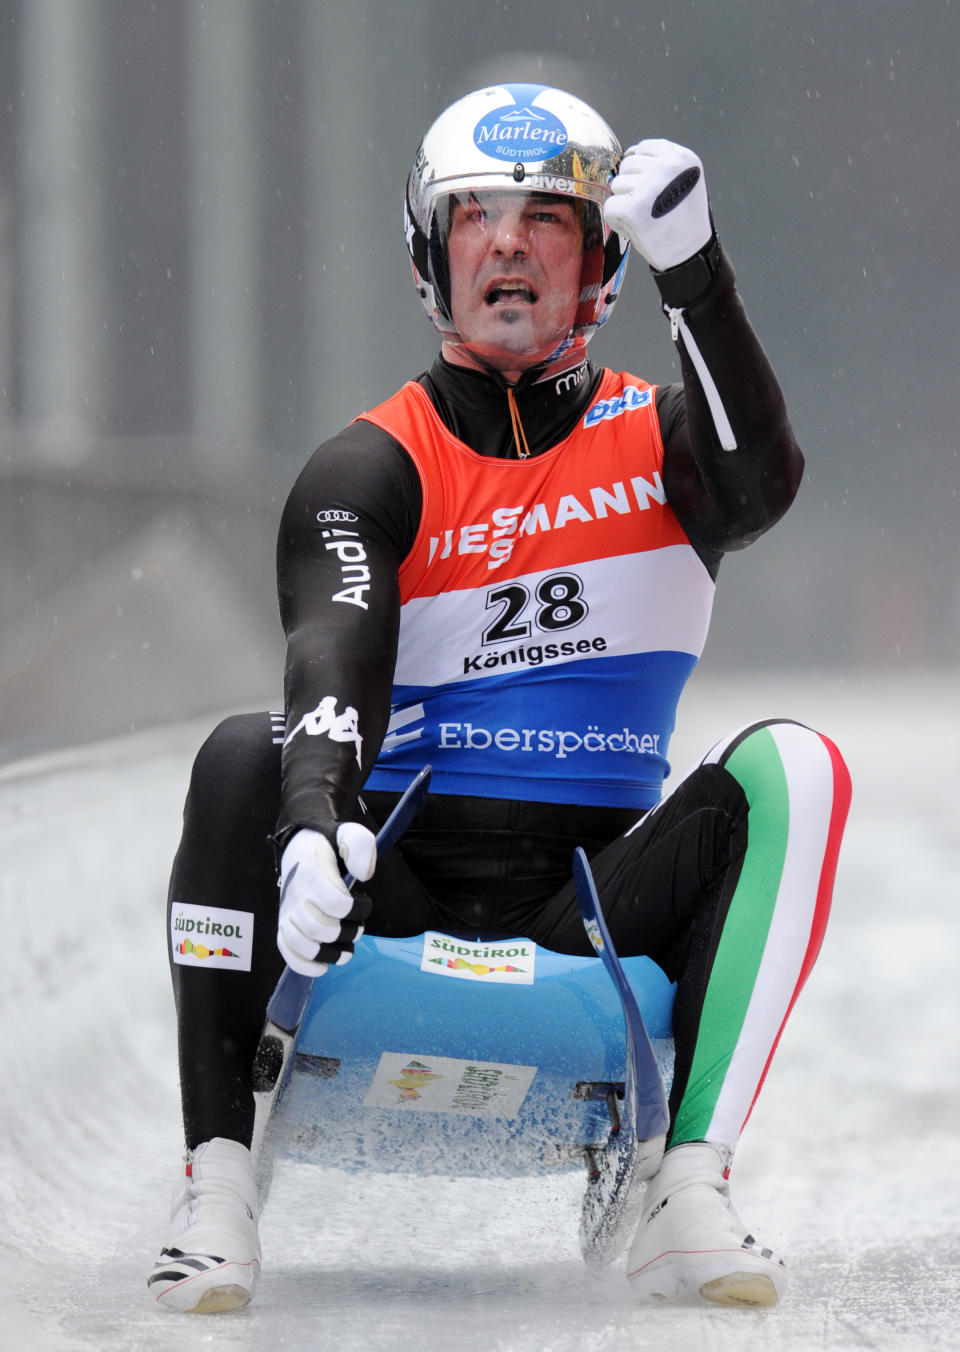 Armin Zoggeler from Italy celebrates after finishing second at the men's Luge World Cup in Koenigssee, Germany, Sunday, Jan. 5, 2014. (AP Photo/dpa,Tobias Hase)